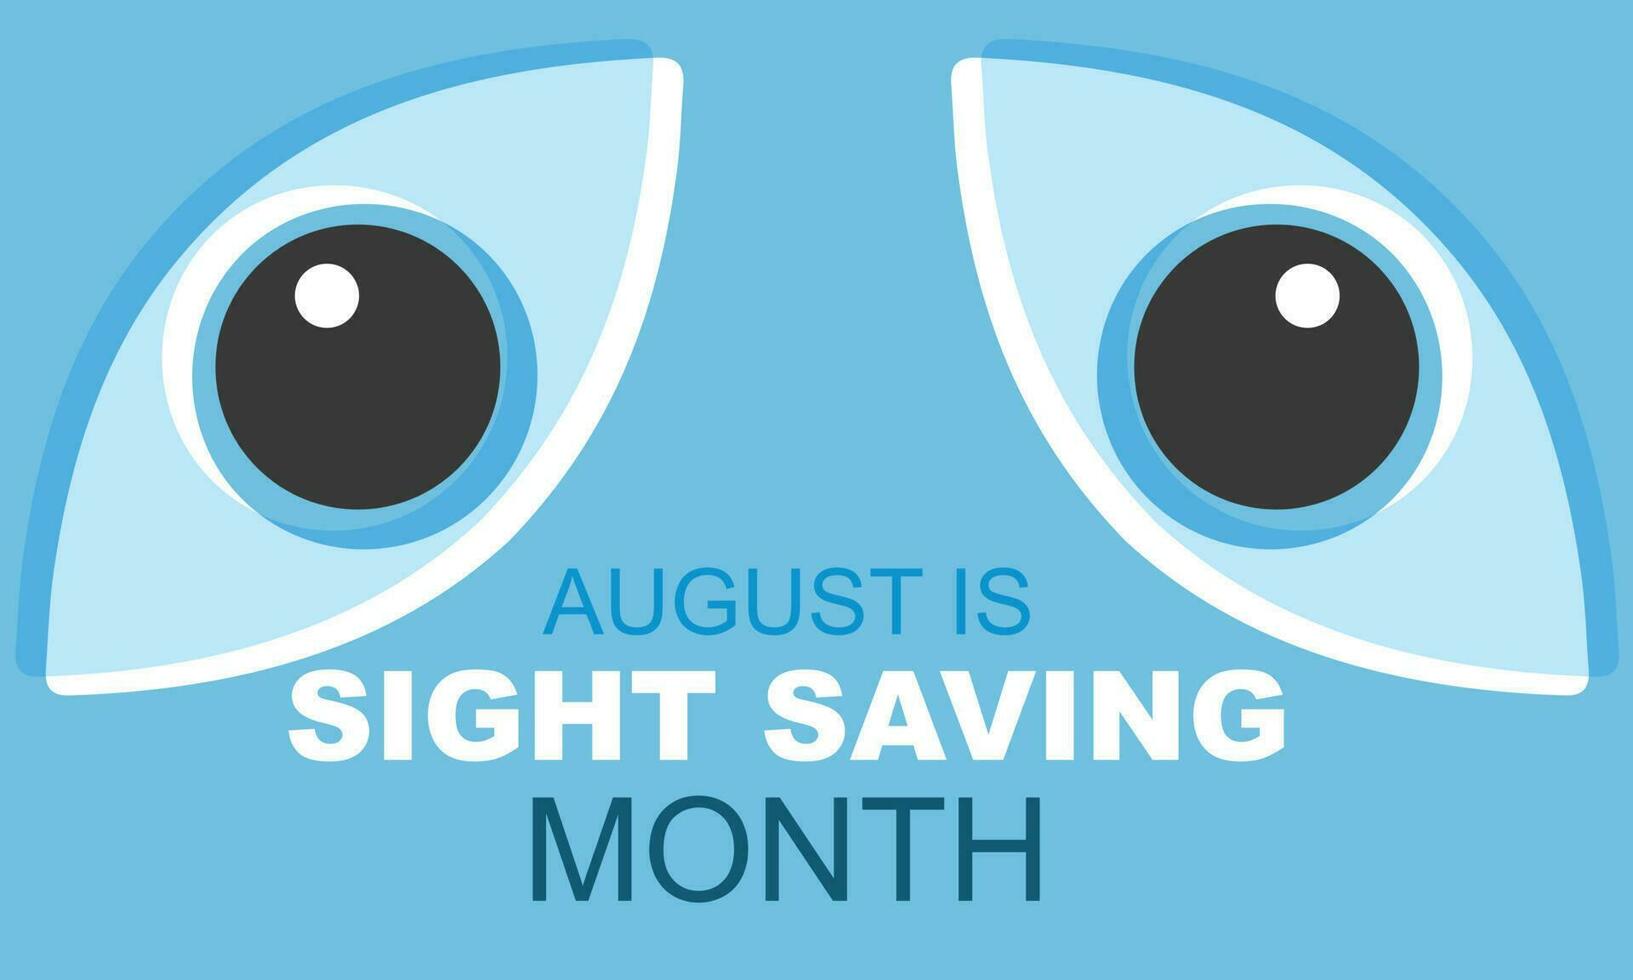 August is sight saving month. background, banner, card, poster, template. Vector illustration.